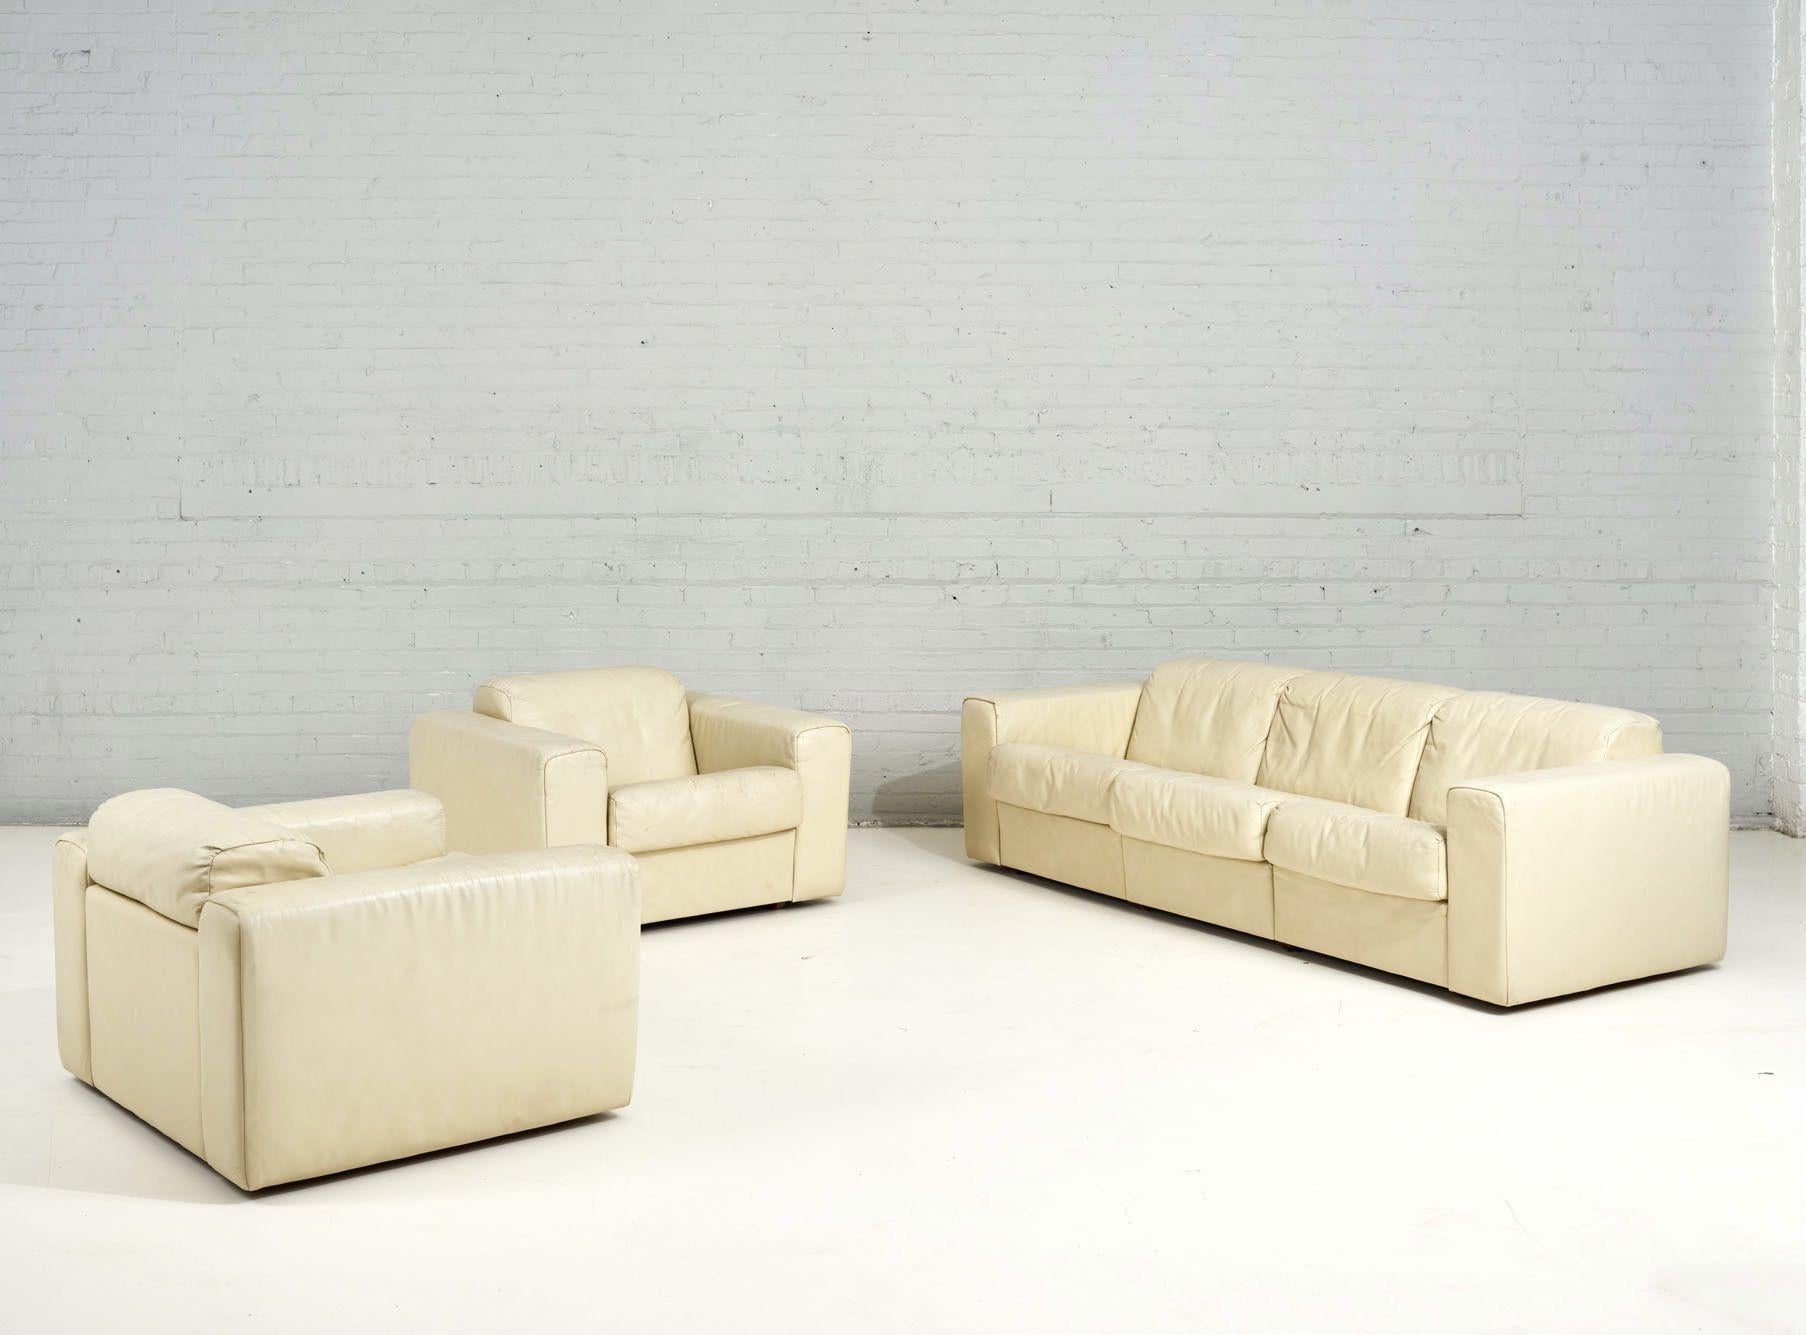 Baron Sofa by Robert Haussmann for Stendig, Cream Leather, 1970 For Sale 8